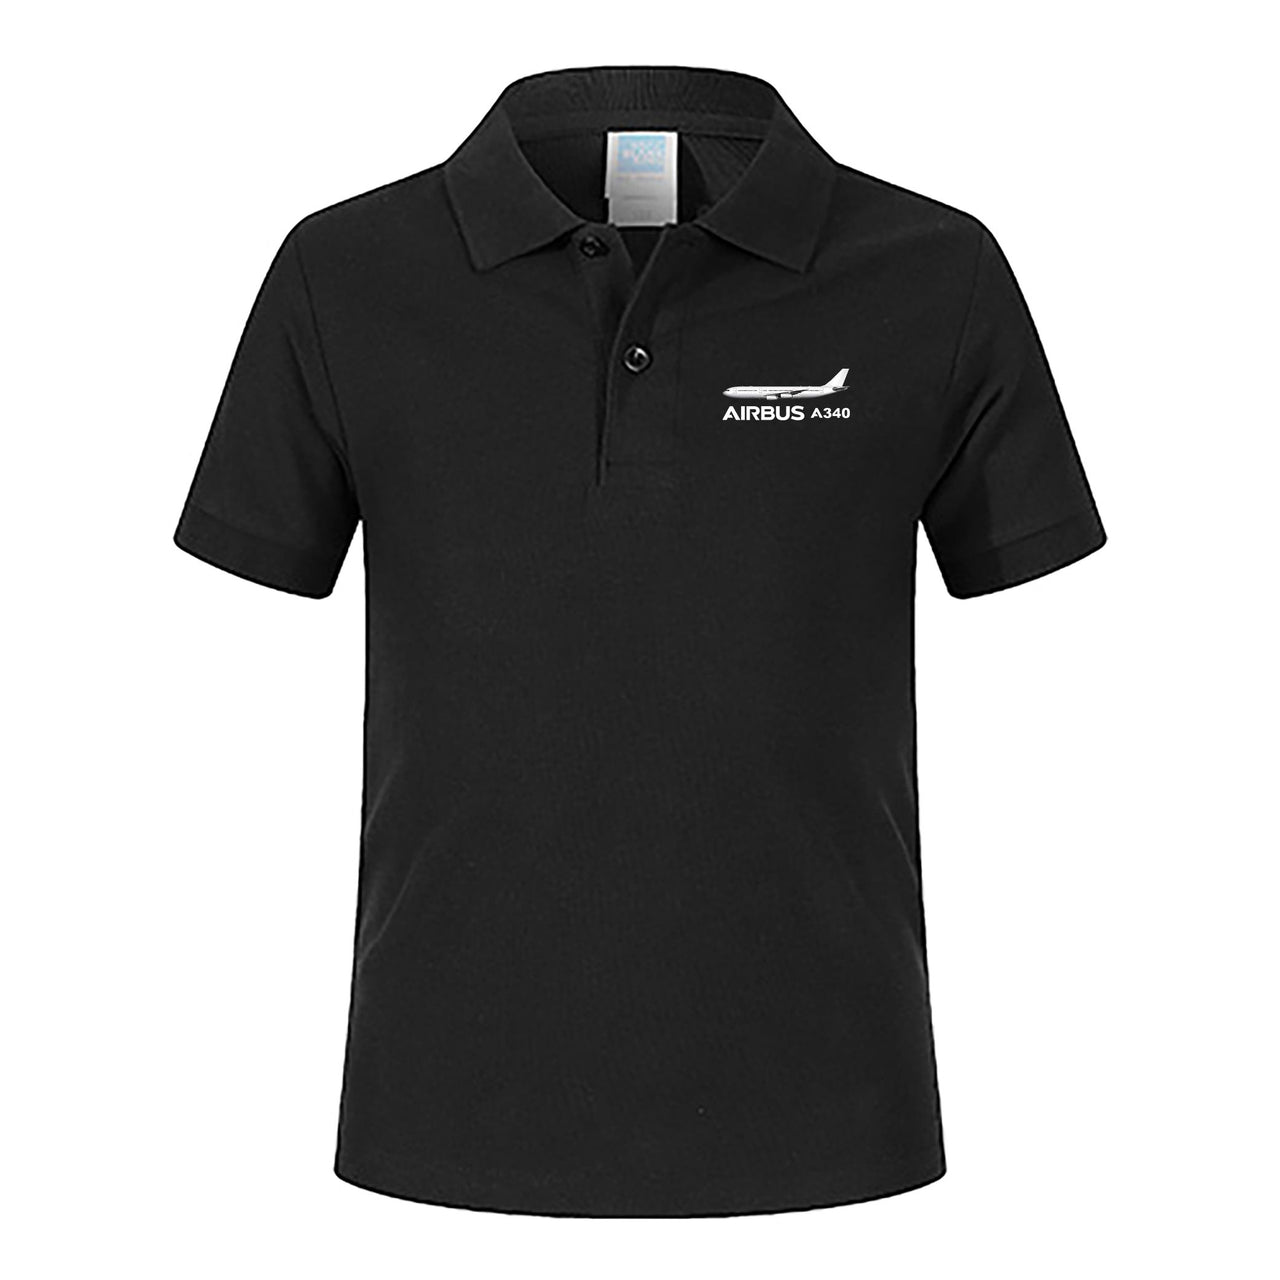 The Airbus A340 Designed Children Polo T-Shirts